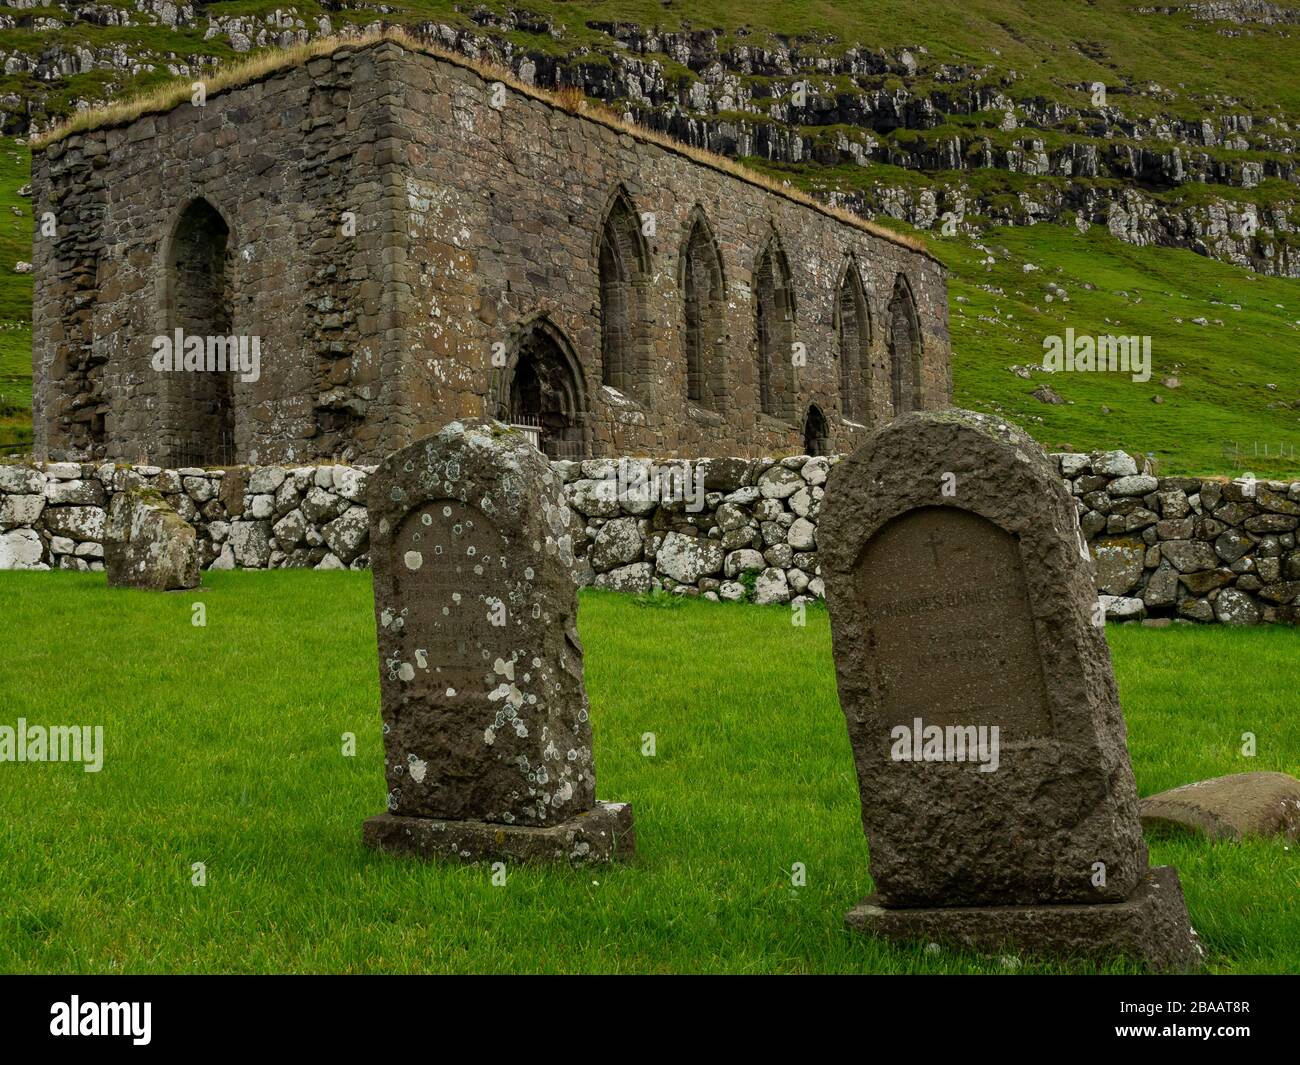 Faroe Islands. Kirkjubøur village. Old never roofed ruins of medieval cathedral. Gravestones in the old cemetery. Stock Photo